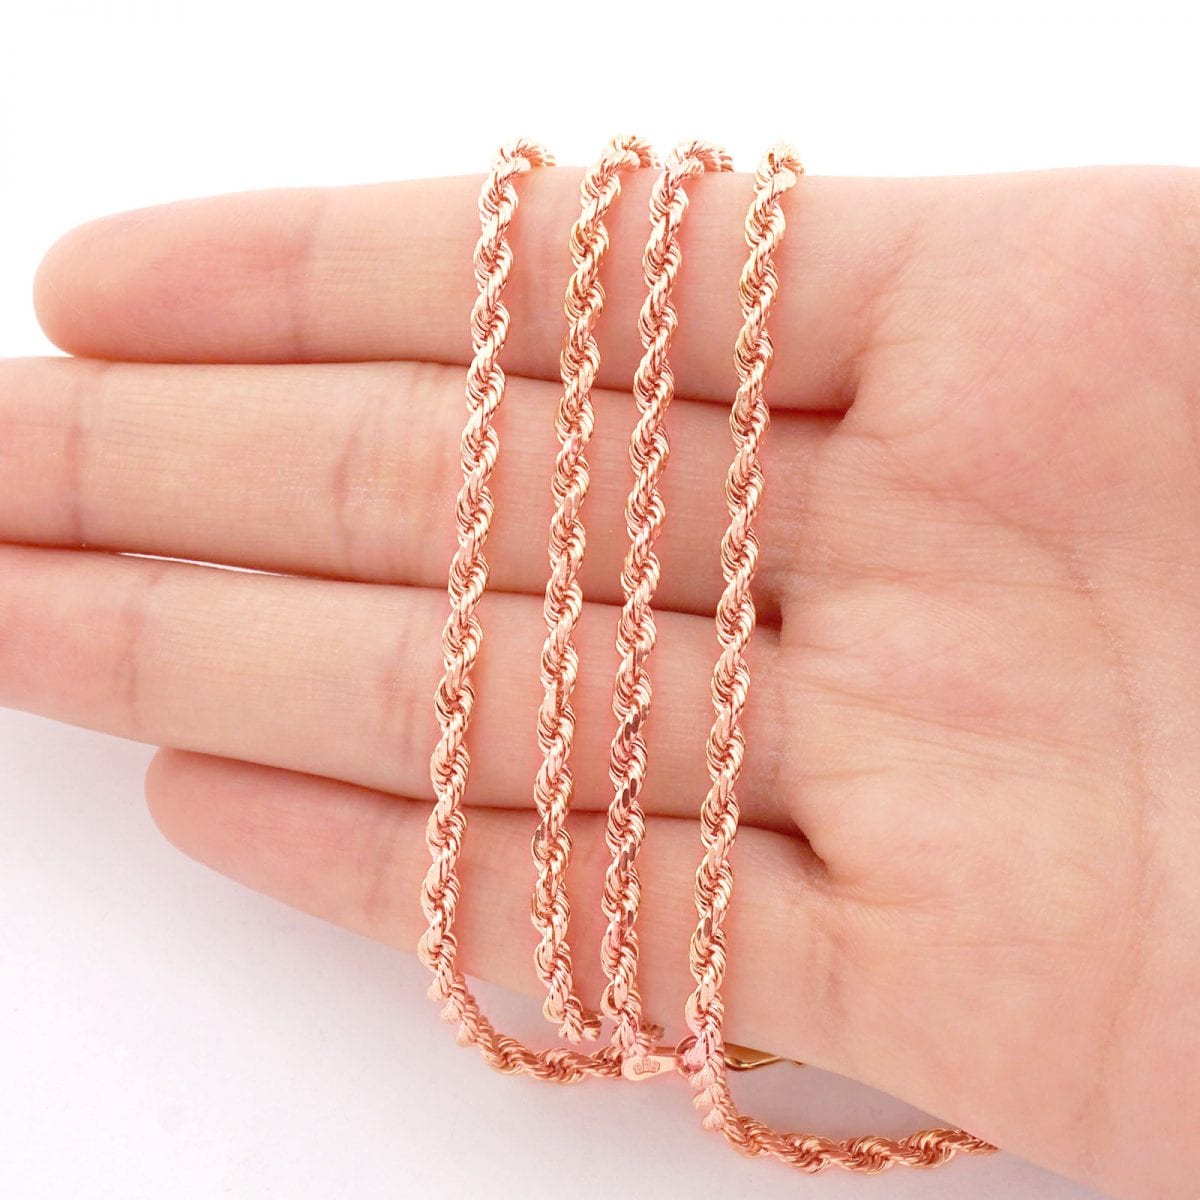 Solid 14k Rose Gold Diamond Cut Rope Chain Necklace 2mm-7mm 20″-30 ...